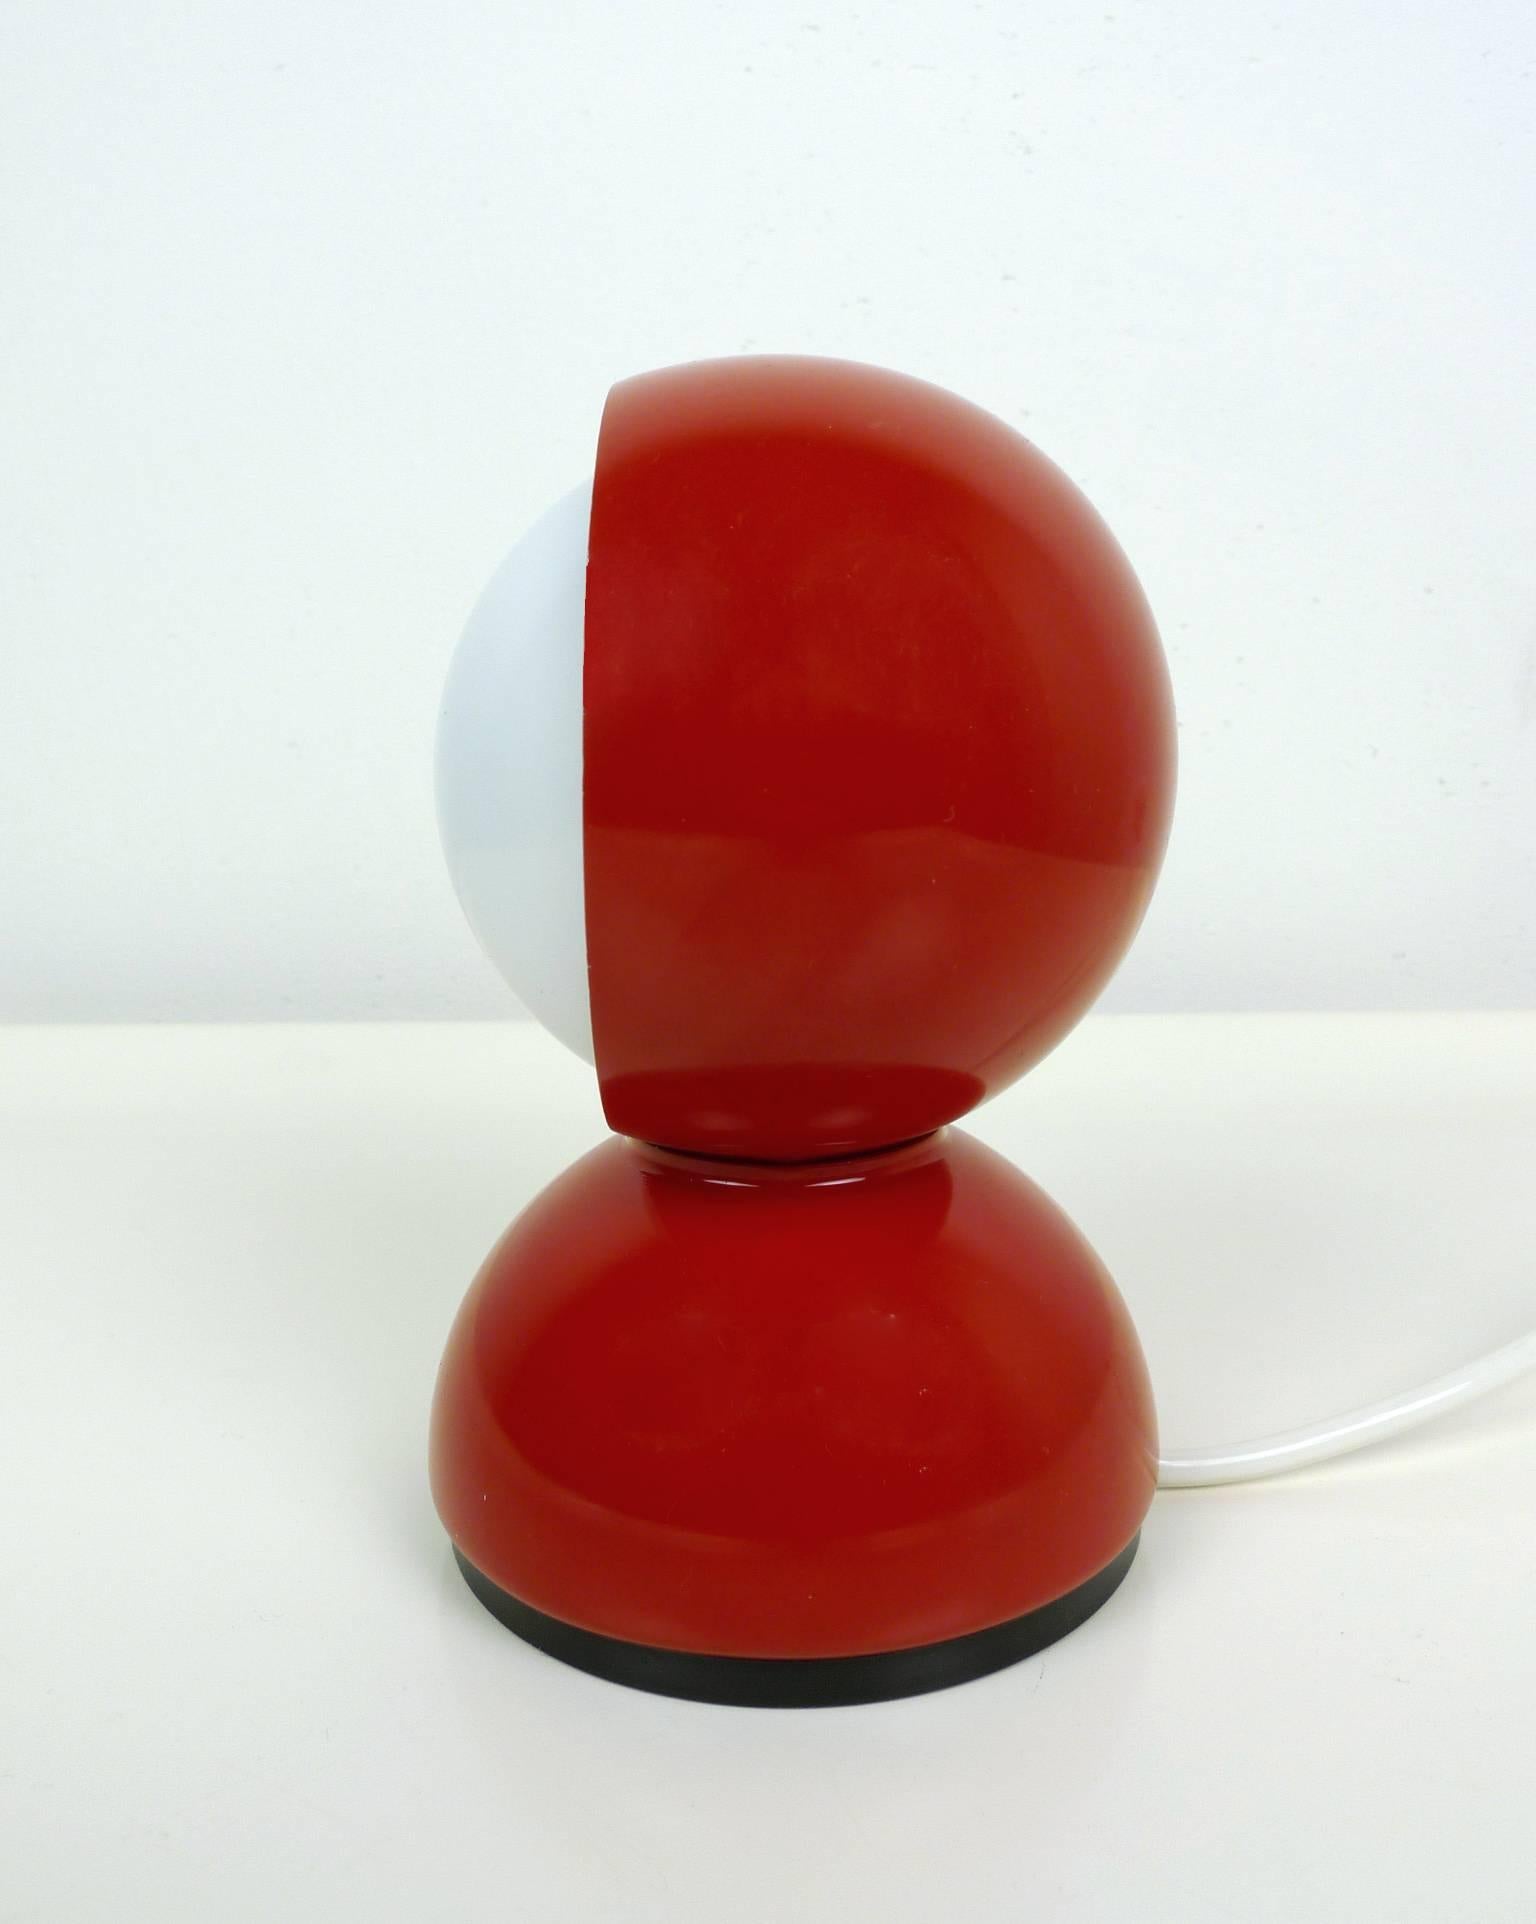 This Eclisse table or wall lamp was designed in 1967 by Vico Magistretti and produced by Artemide in Italy. The red-painted metal body surrounds a white hemisphere, which regulates the light intensity. The effect of the light is modeled on the moon